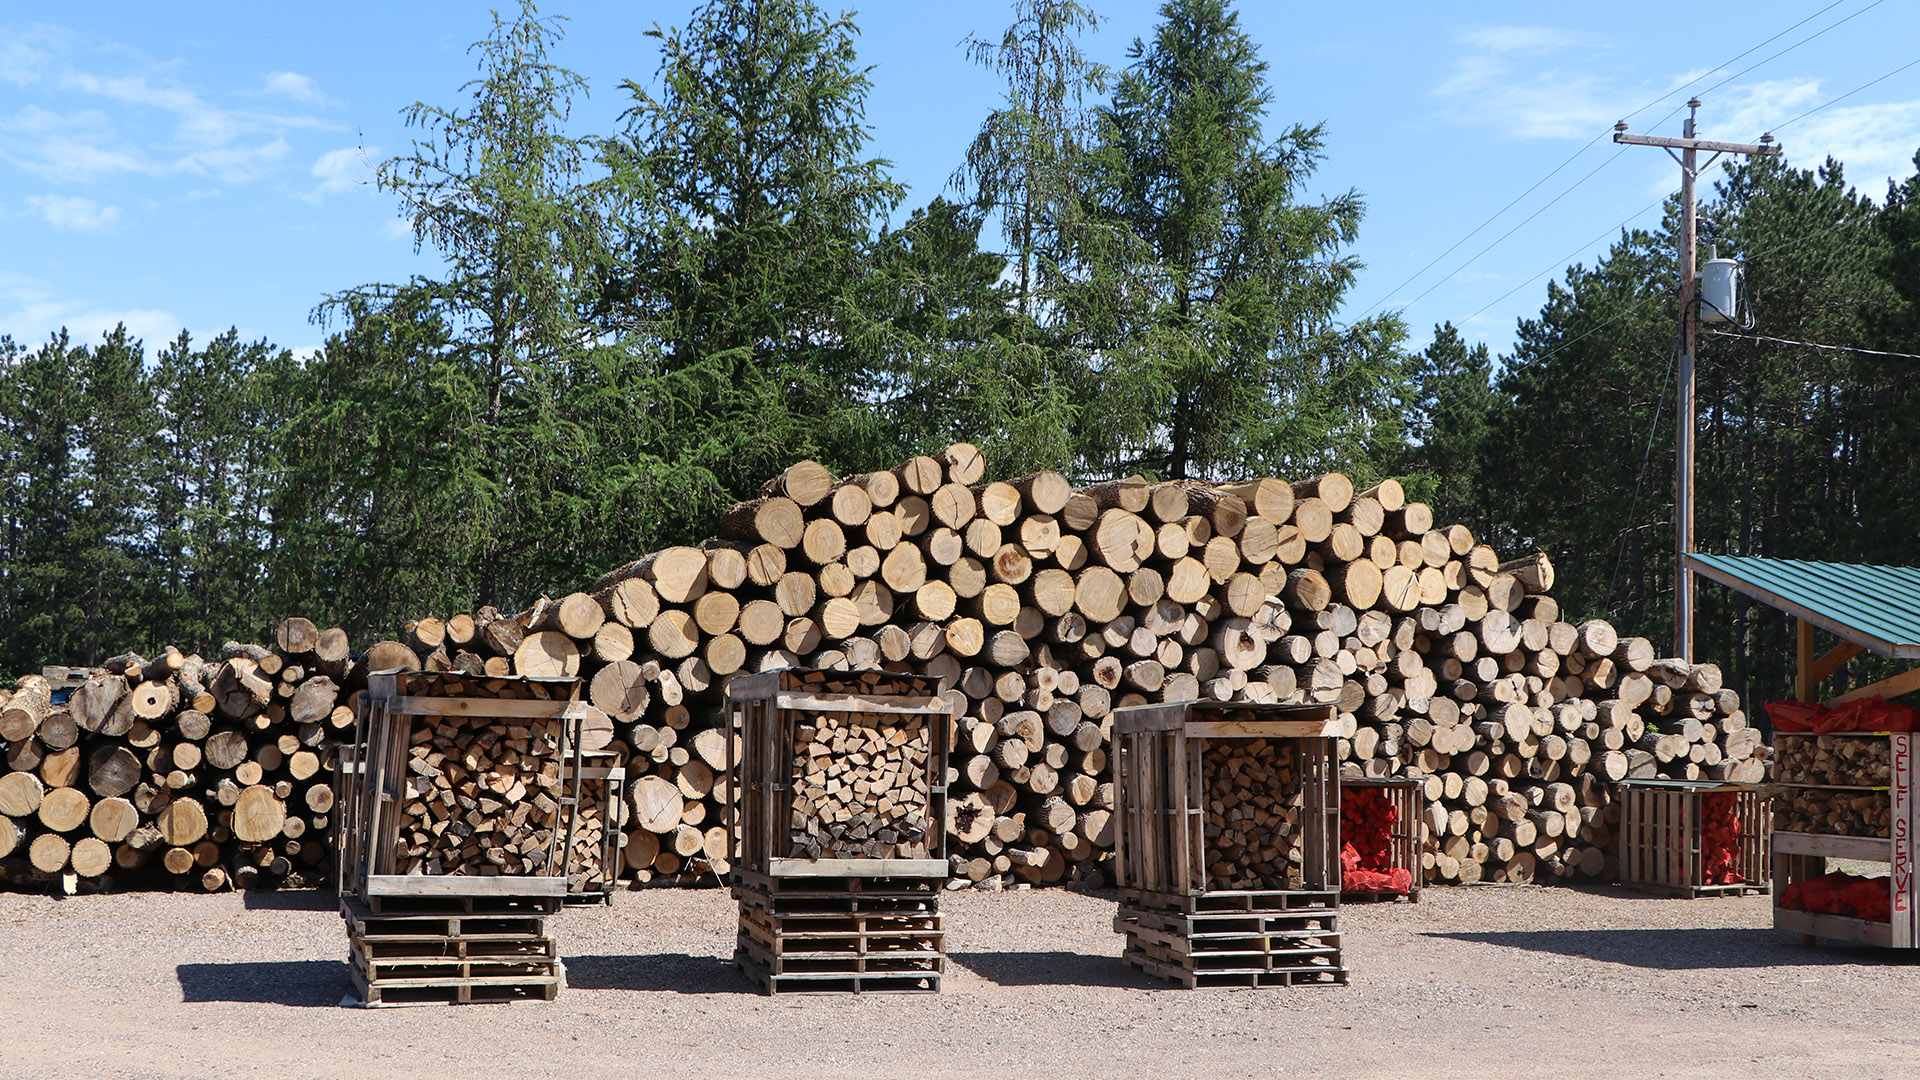 A large stacked pile of cut logs stands at the edge of a gravel parking lot, with trees and and electrical pole standing in the background.